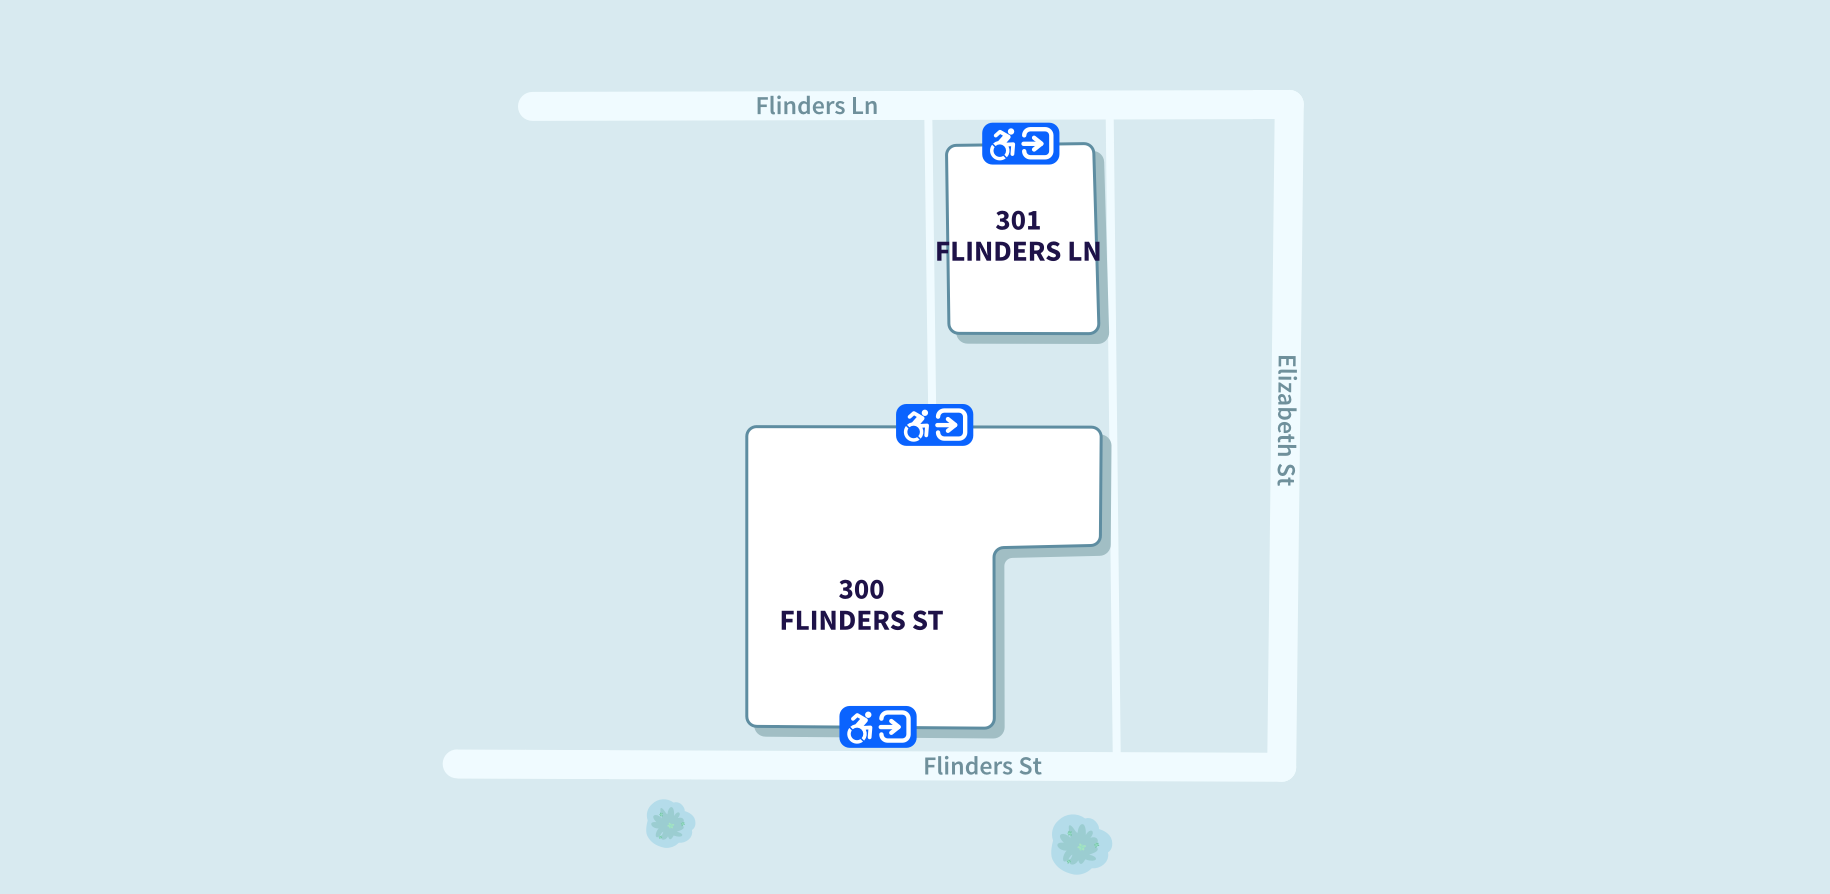 Map of Victoria University City Flinders (300 Flinders Street) and City Flinders Lane (301 Flinders Lane) campuses showing accessible entrances - the north side of 301 Flinders Lane and the north and south entrances of 300 Flinders Street.